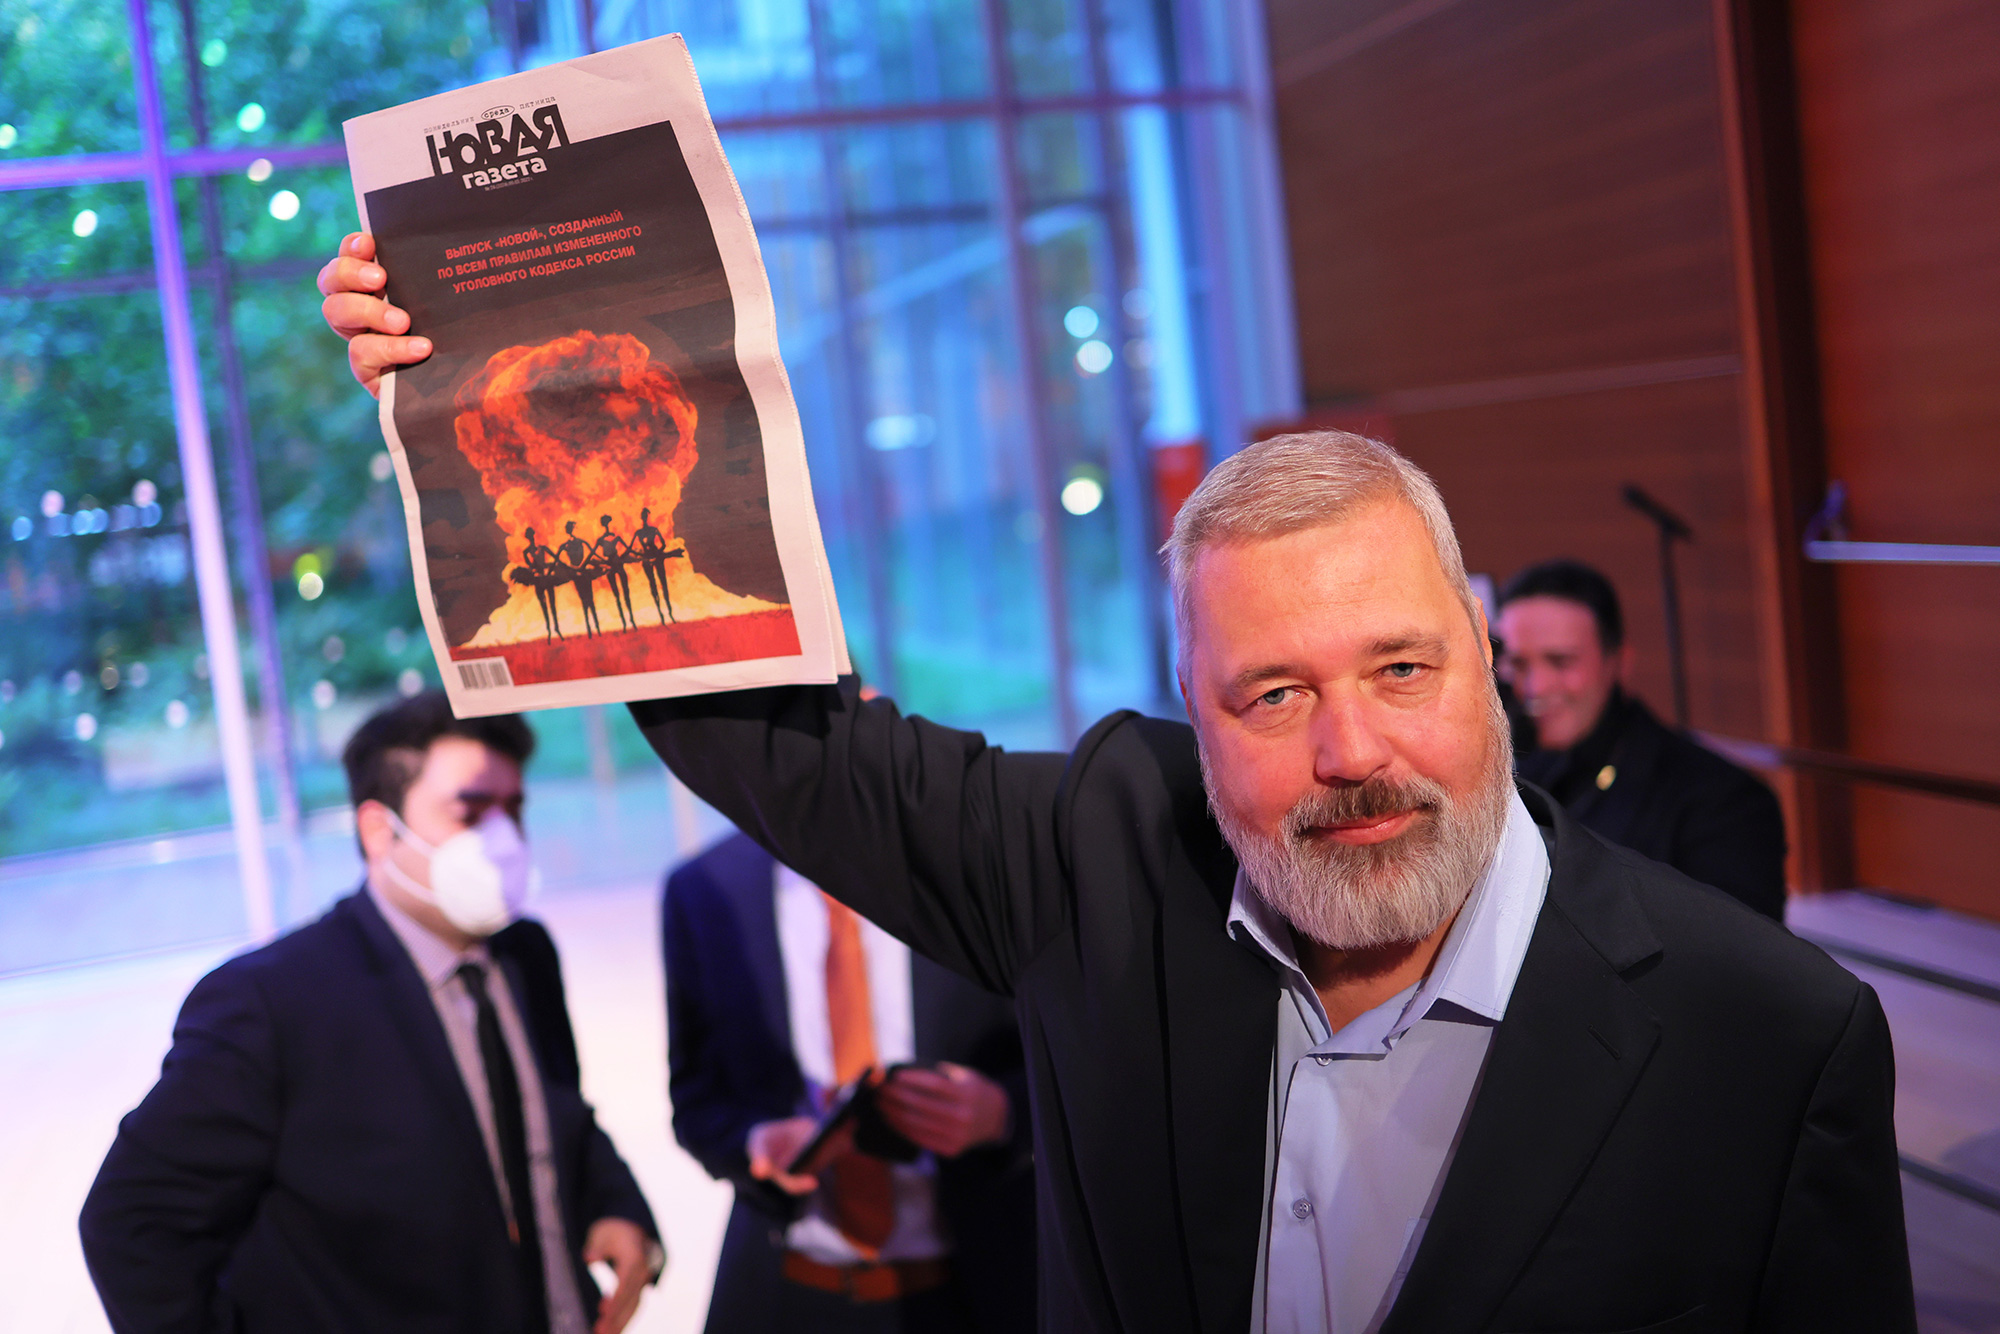 Nobel Peace Prize winner Dmitry Muratov, editor-in-chief of the Russian newspaper Novaya Gazeta, holds up a copy of his paper after the conclusion of bidding during a charity auction in New York on June 20, 2022.